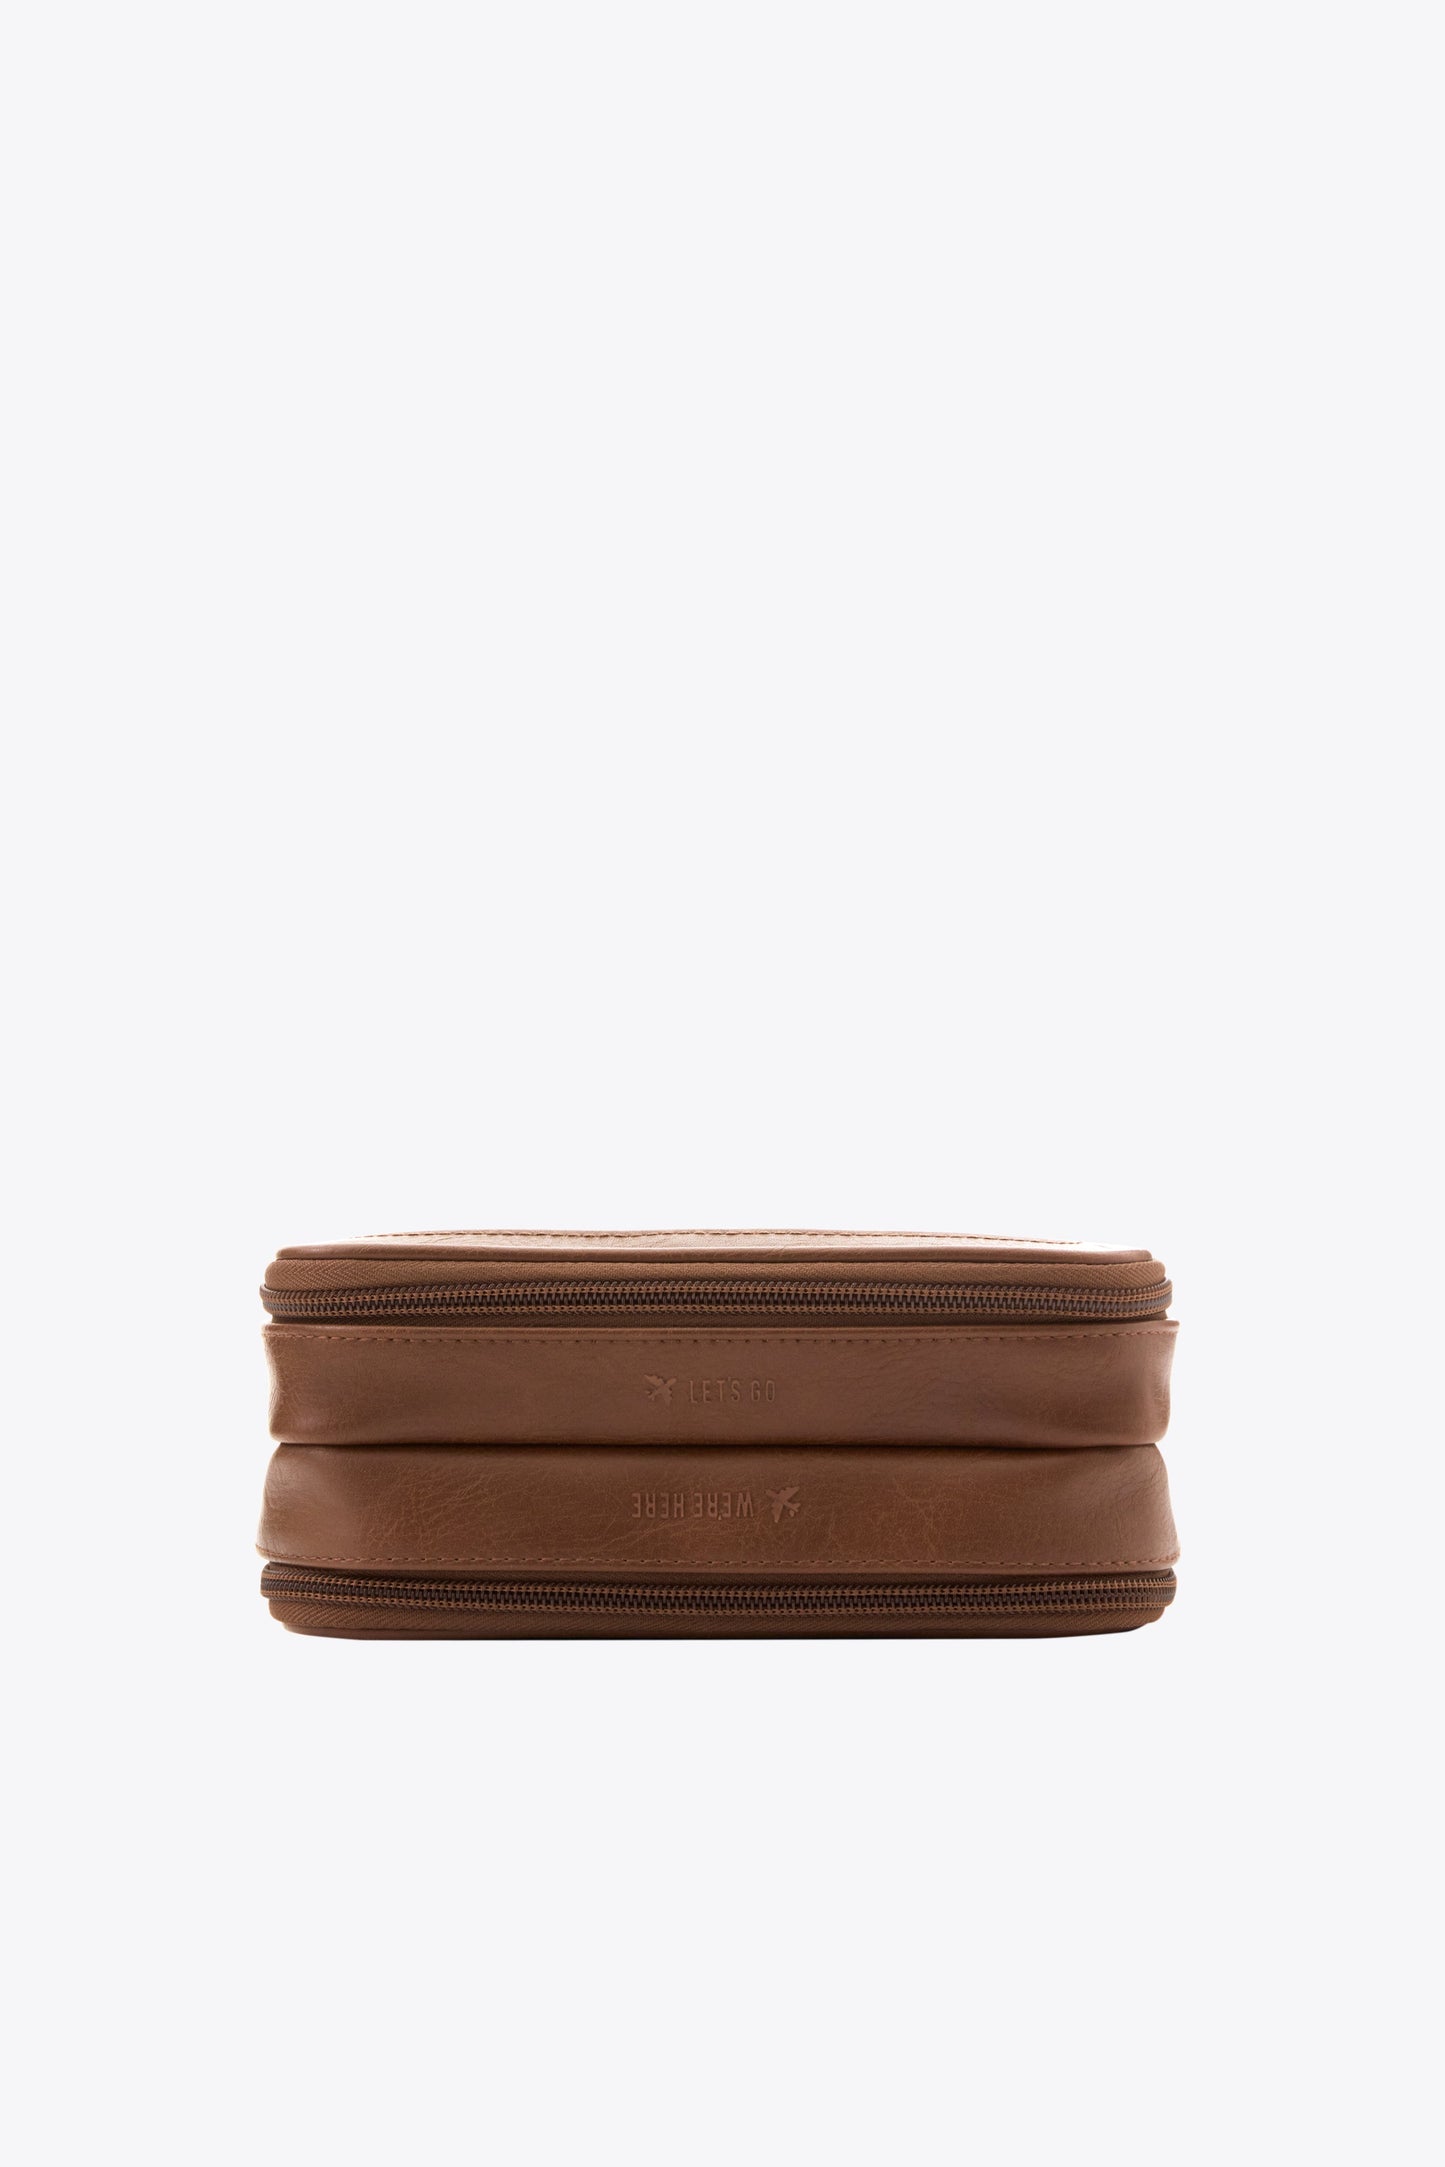 The On The Go Essential Case in Maple